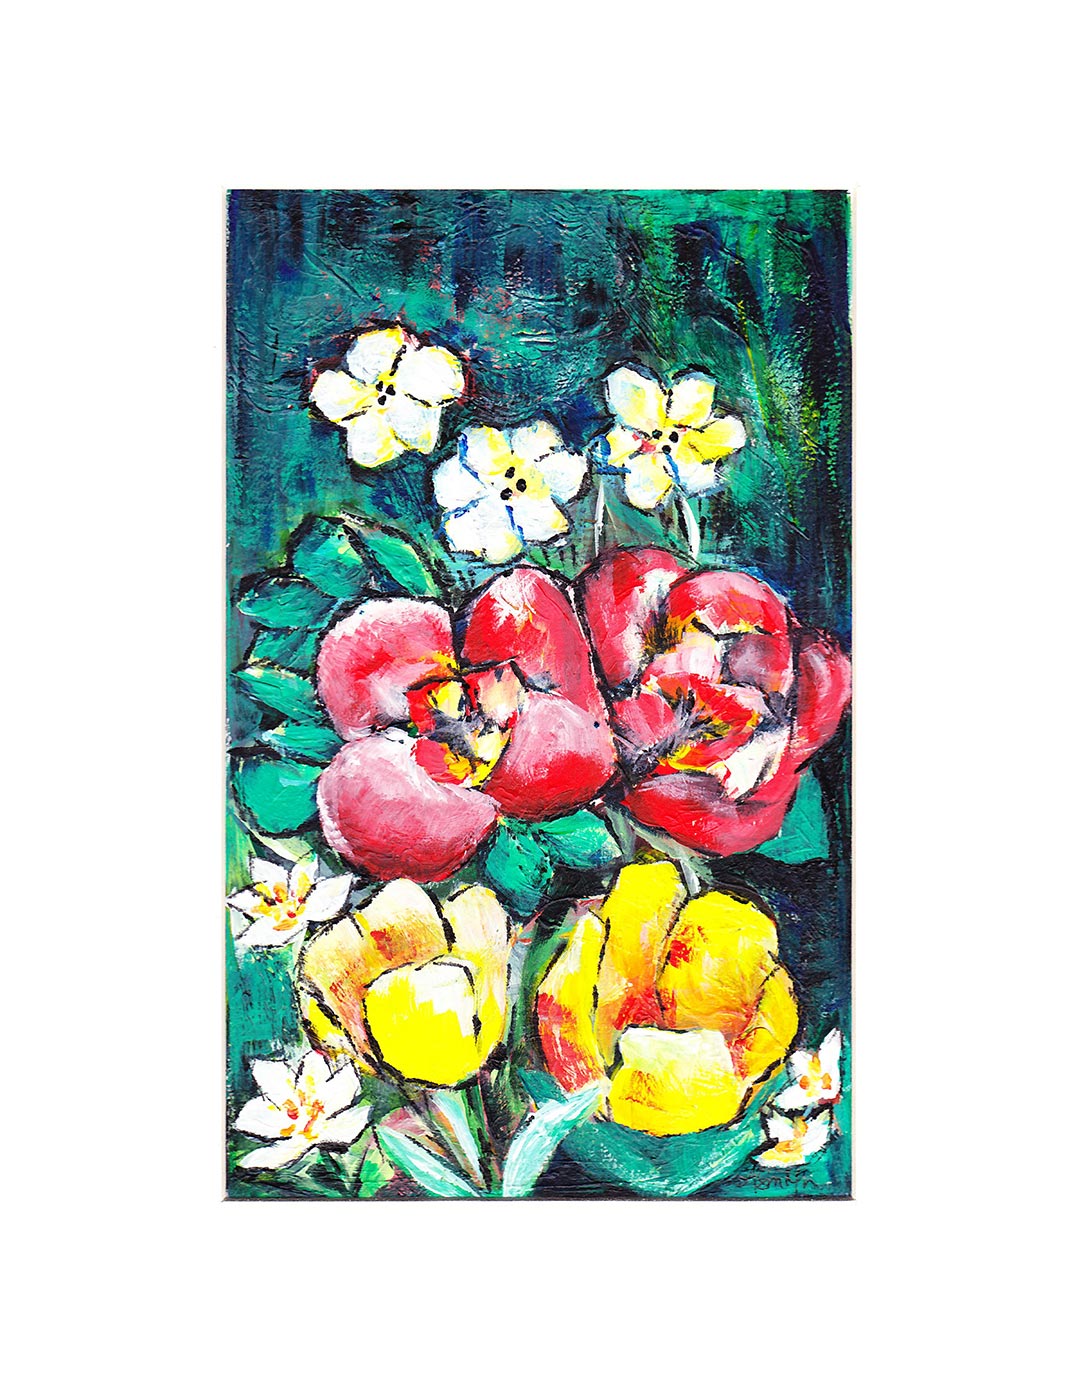 Daffodils, Begonias & Tulips, 5x8" Acrylic Painting - Original Art by Andrea Smith